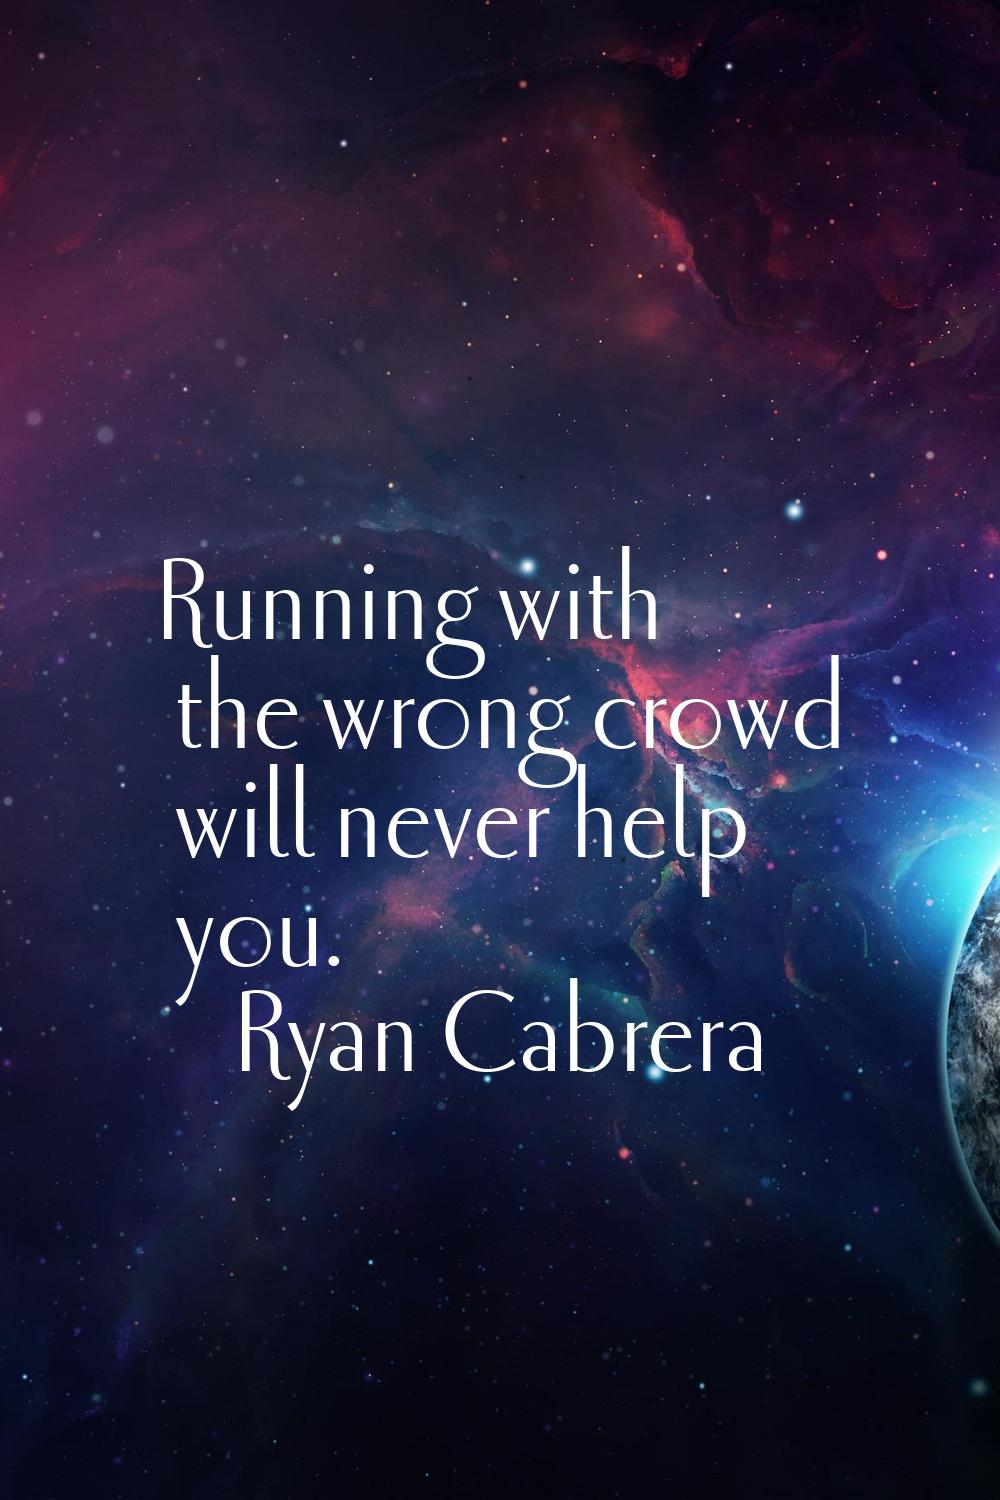 Running with the wrong crowd will never help you.